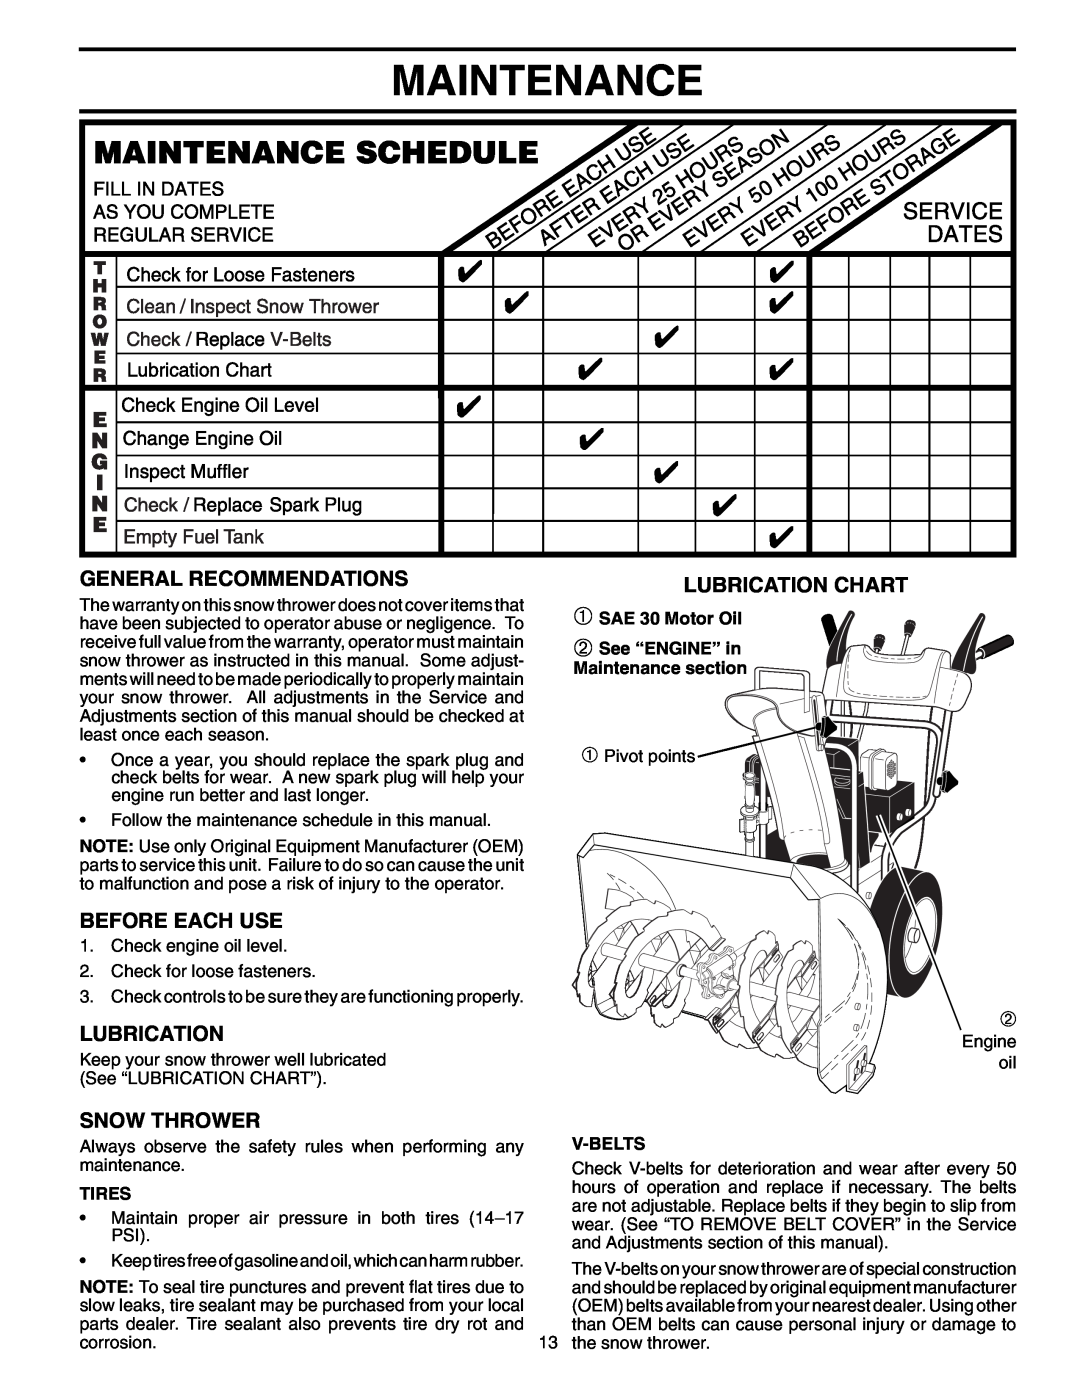 Poulan 199350 Maintenance, General Recommendations, Before Each Use, Lubrication Chart, Snow Thrower, Tires, V-Belts 